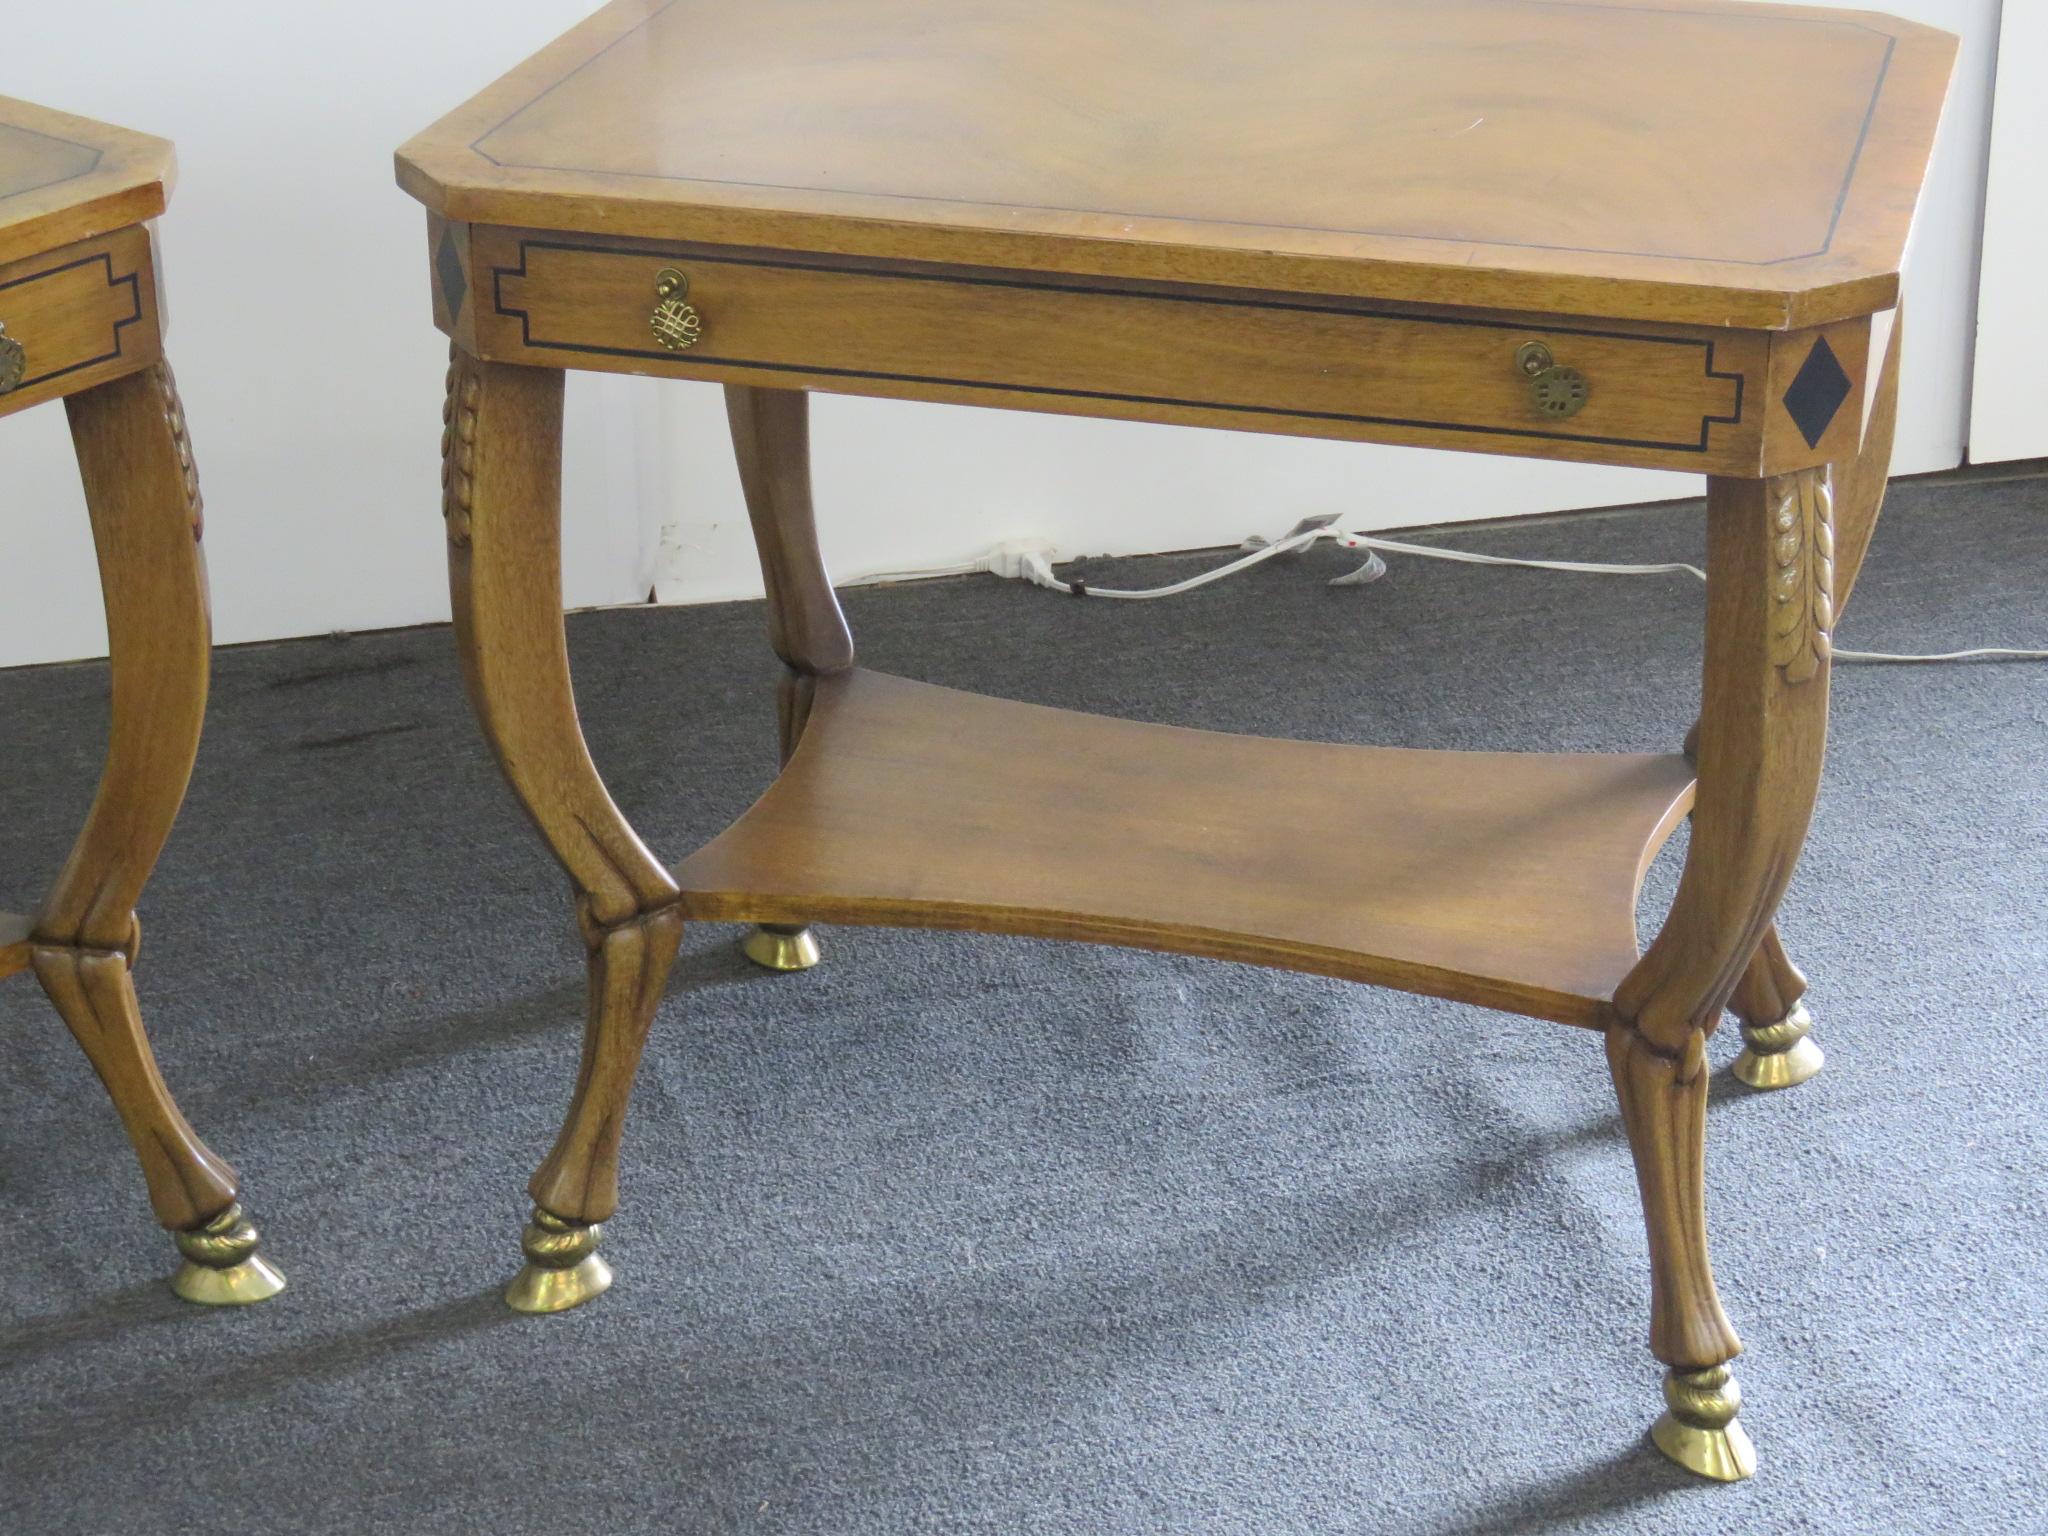 Pair of Regency style paint decorated end tables with 1 drawer and brass feet.